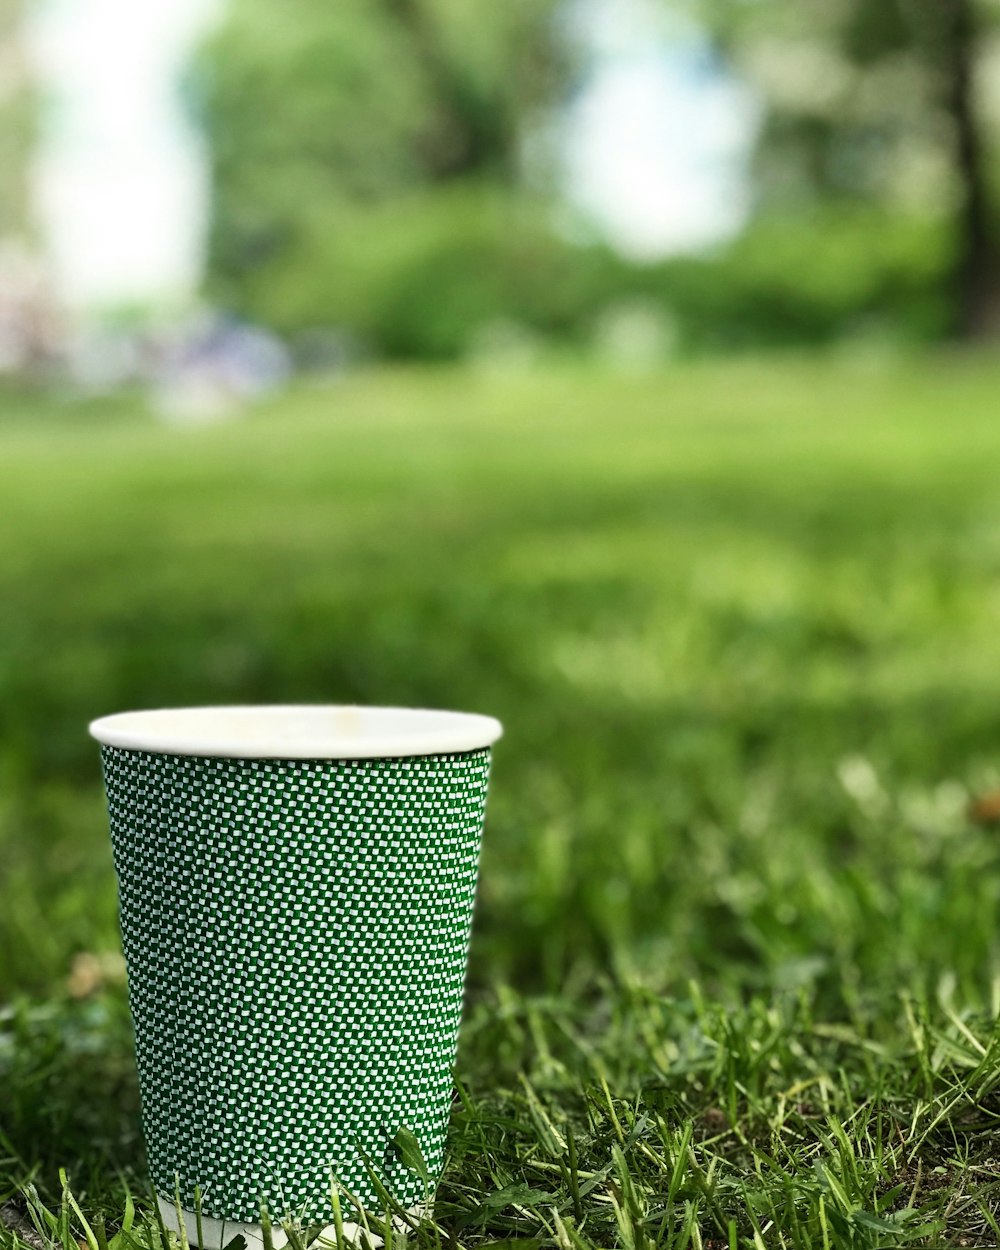 green and white solo cup on grass field